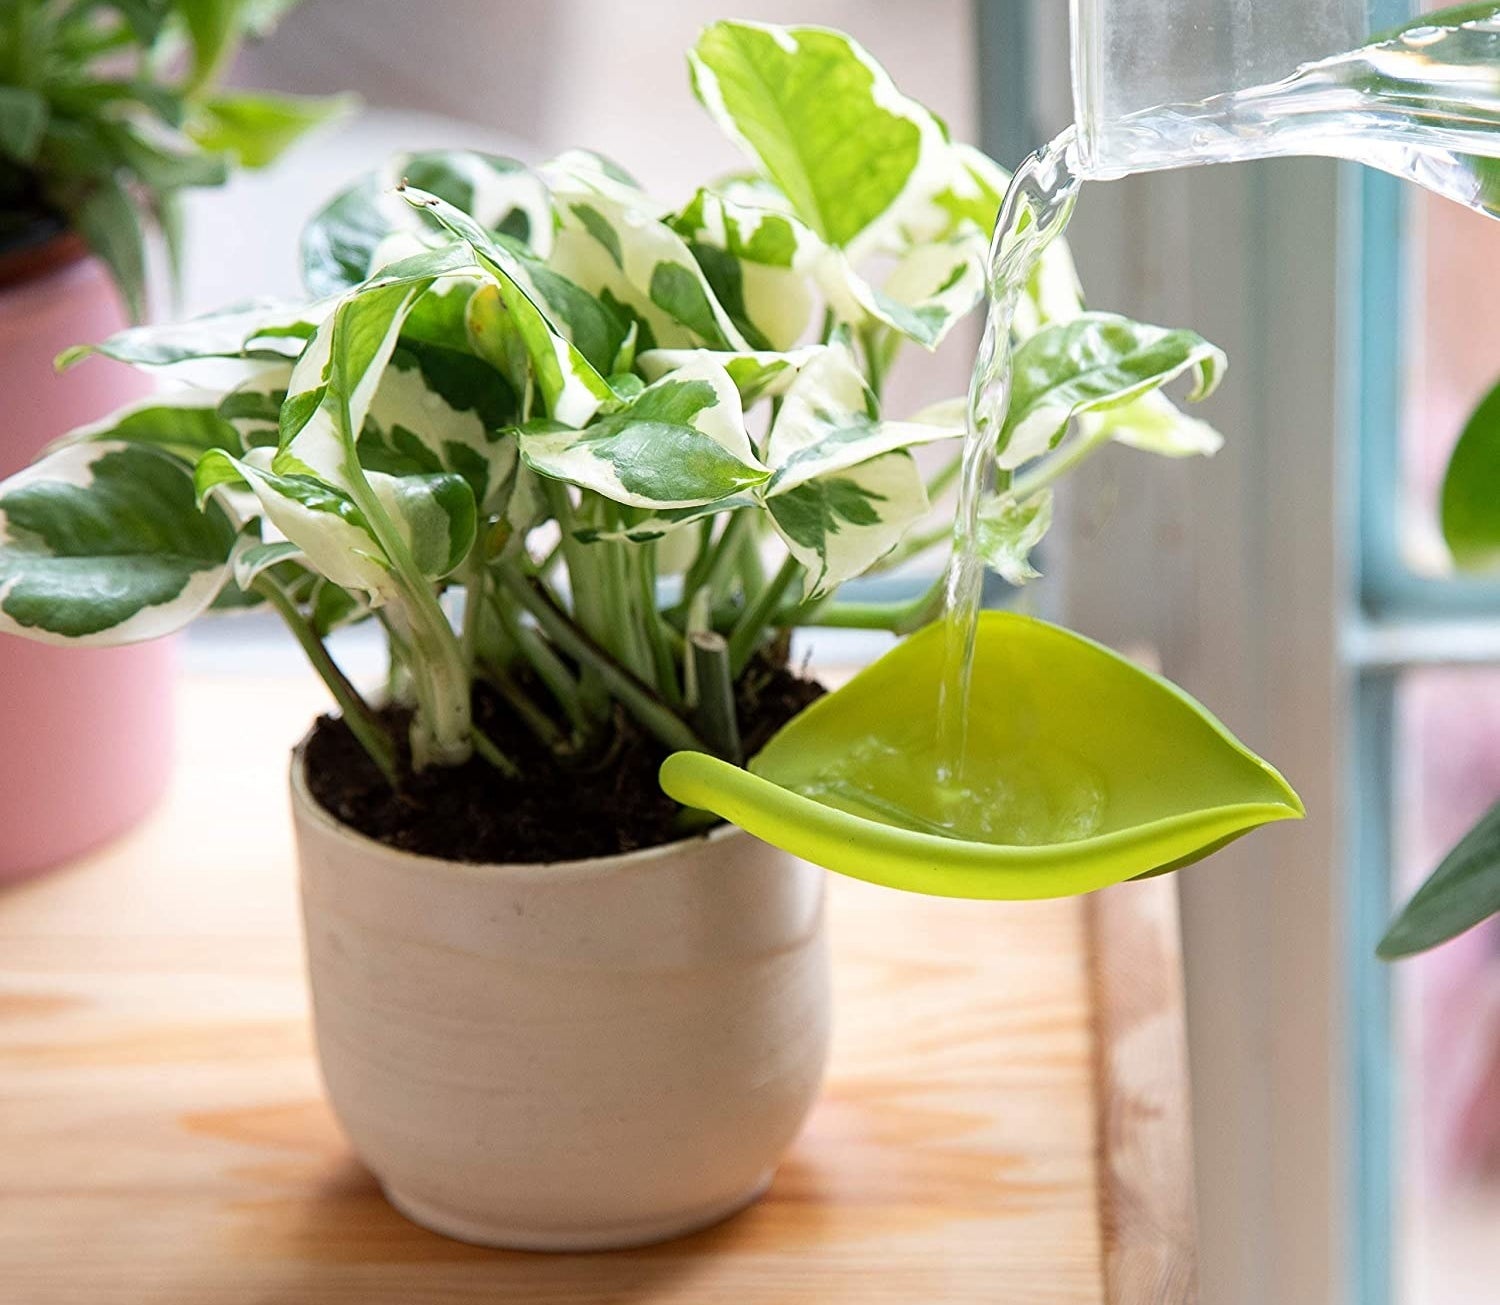 water being poured into a leaf shaped funnel attached to a potted plant